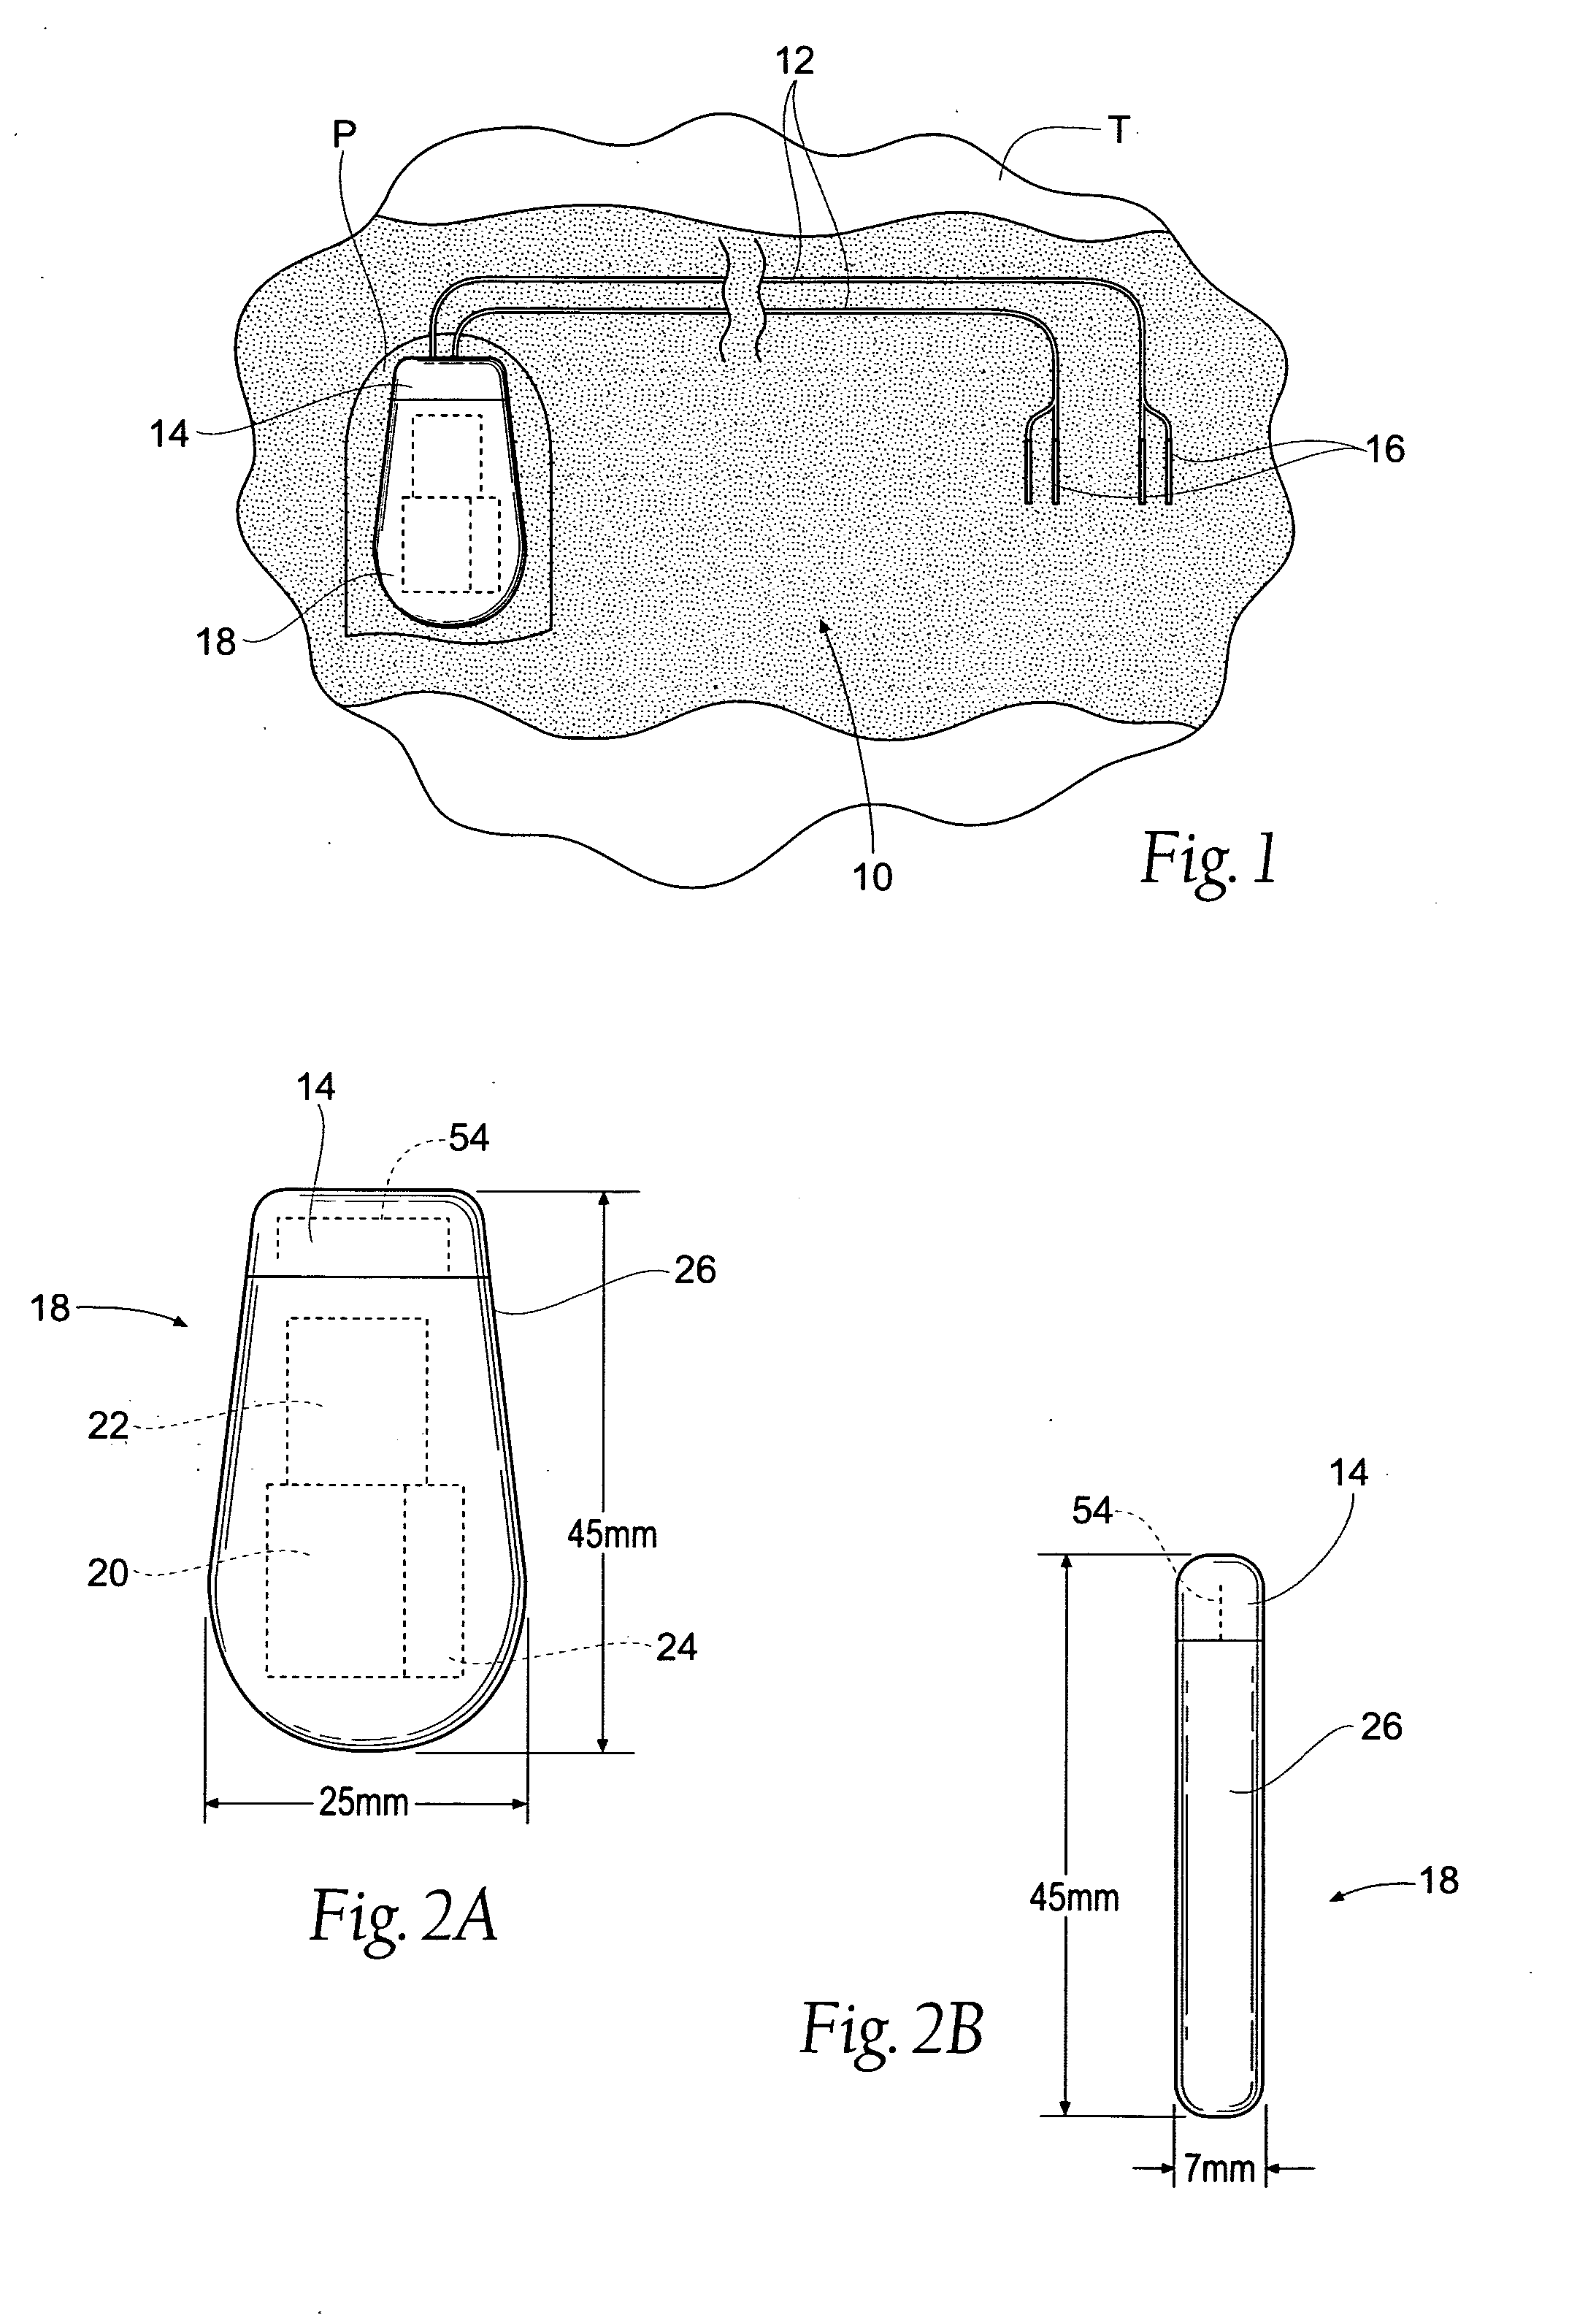 Implantable system and methods for acquisition and processing of electrical signals from muscles and/or nerves and/or central nervous system tissue